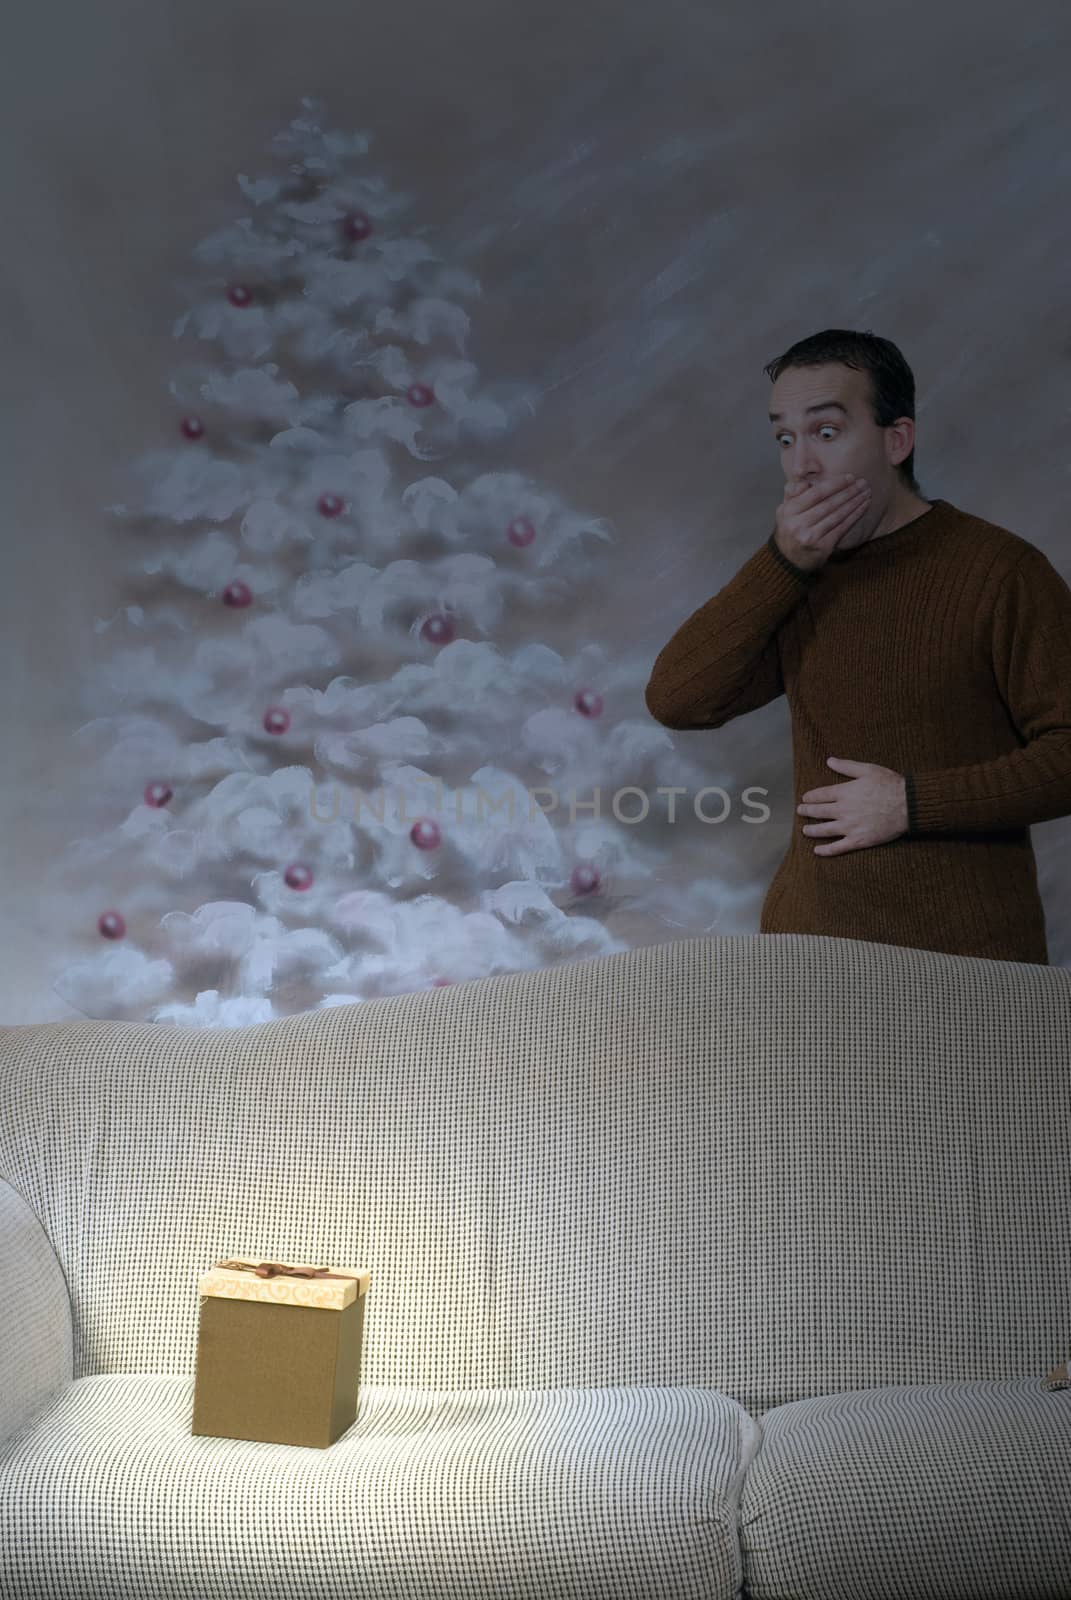 A christmas box is glowing at night in the living room, with a man covering his mouth in surprise